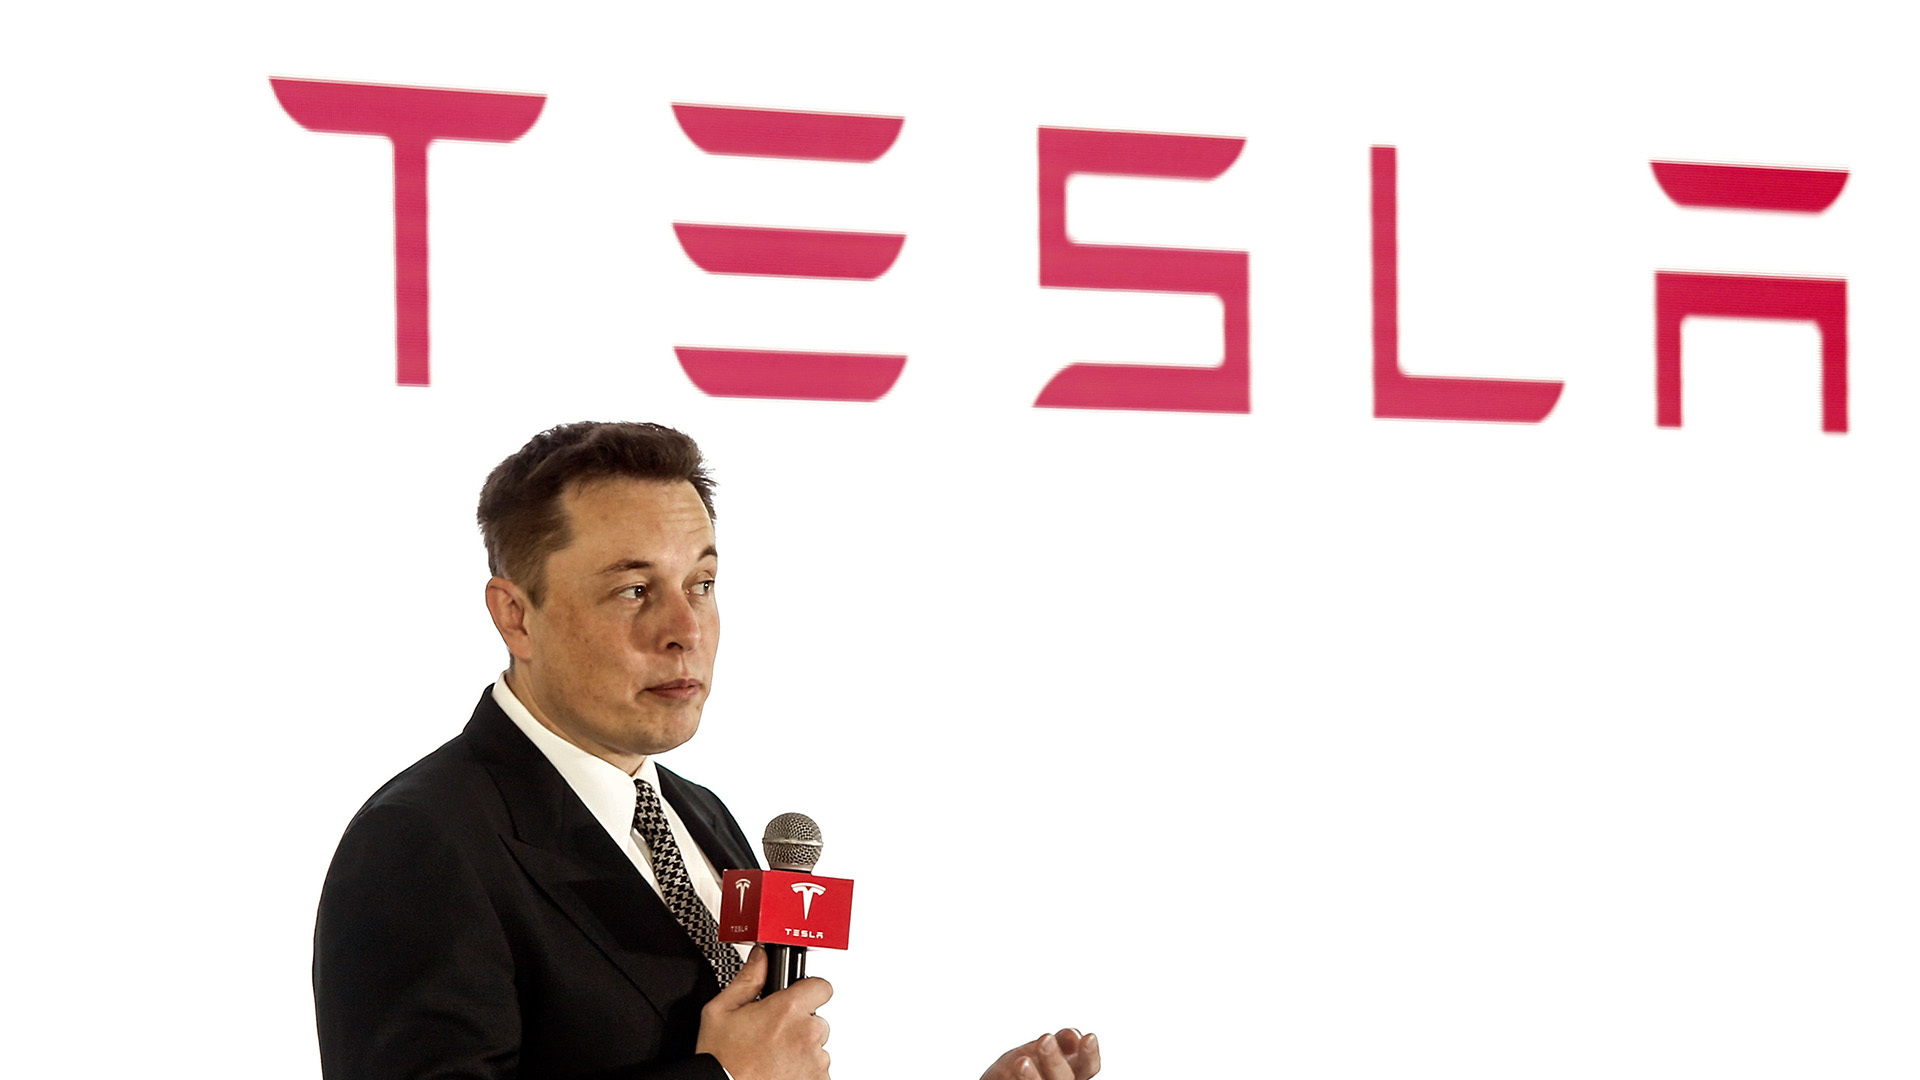 Elon Musk says Chinese EV makers will 'demolish' other companies